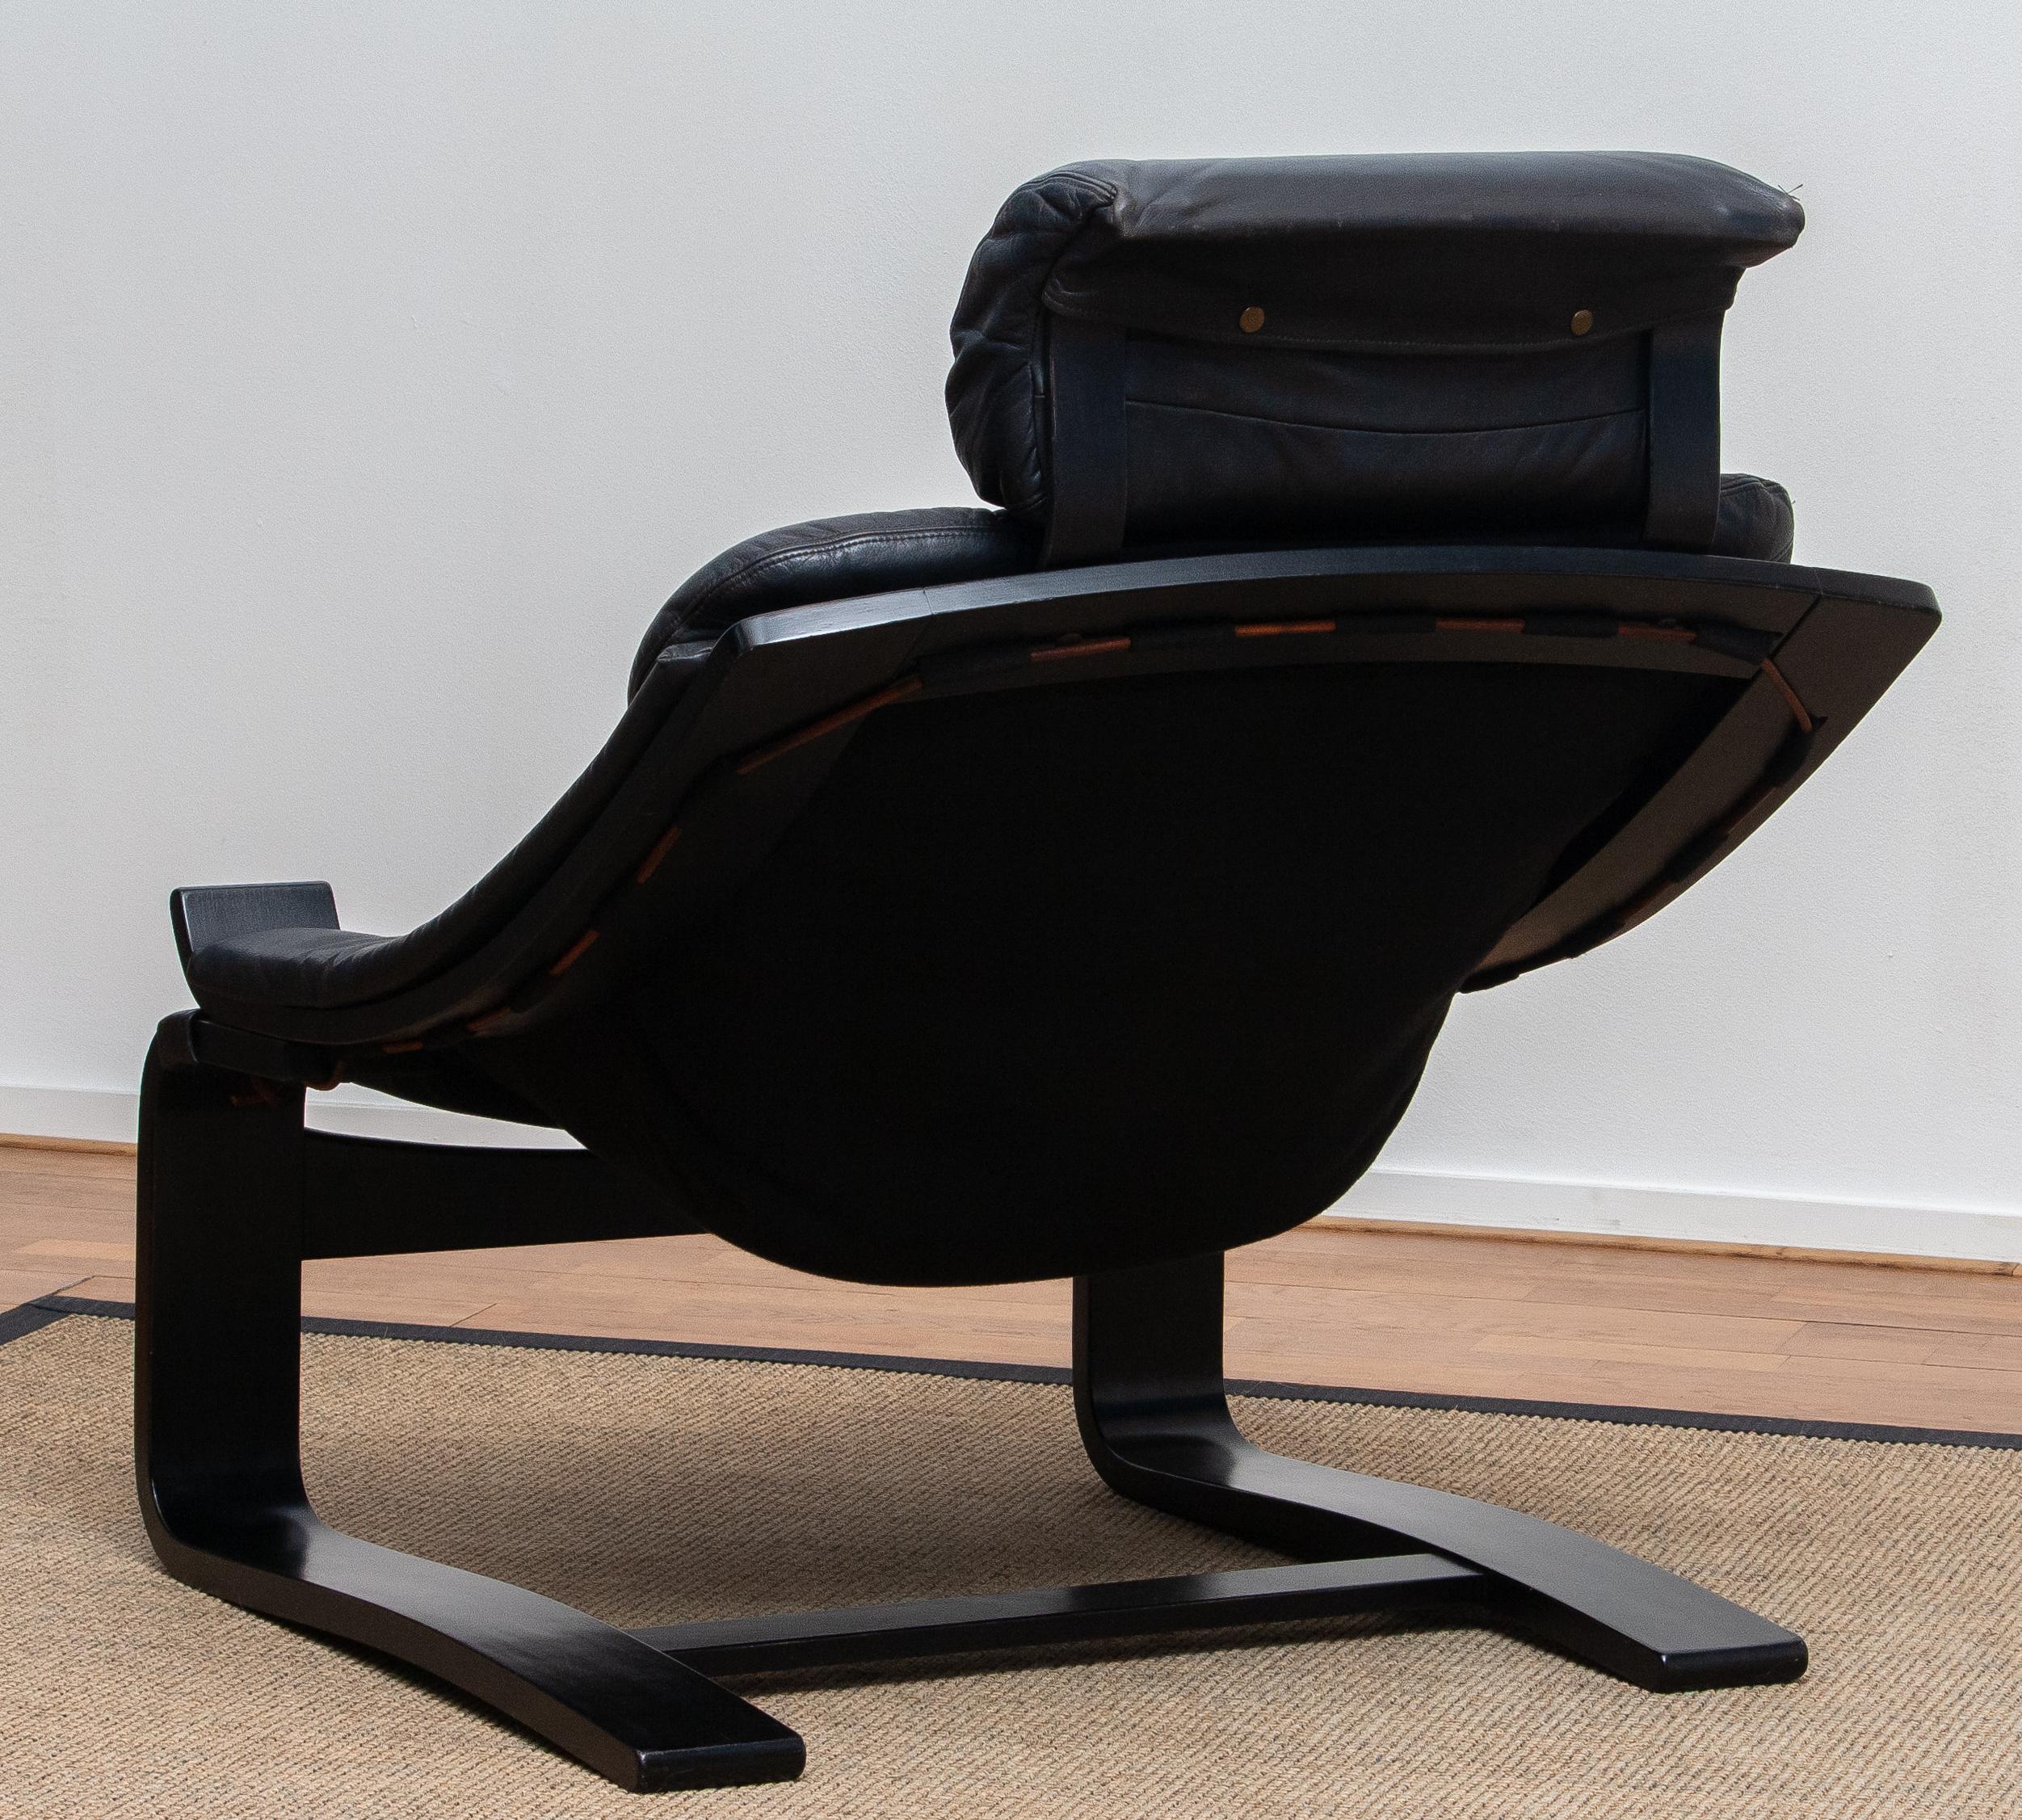 1970s, Black 'Kroken' Lounge Chair By Ake Fribytter for Nelo Sweden In Leather. 4